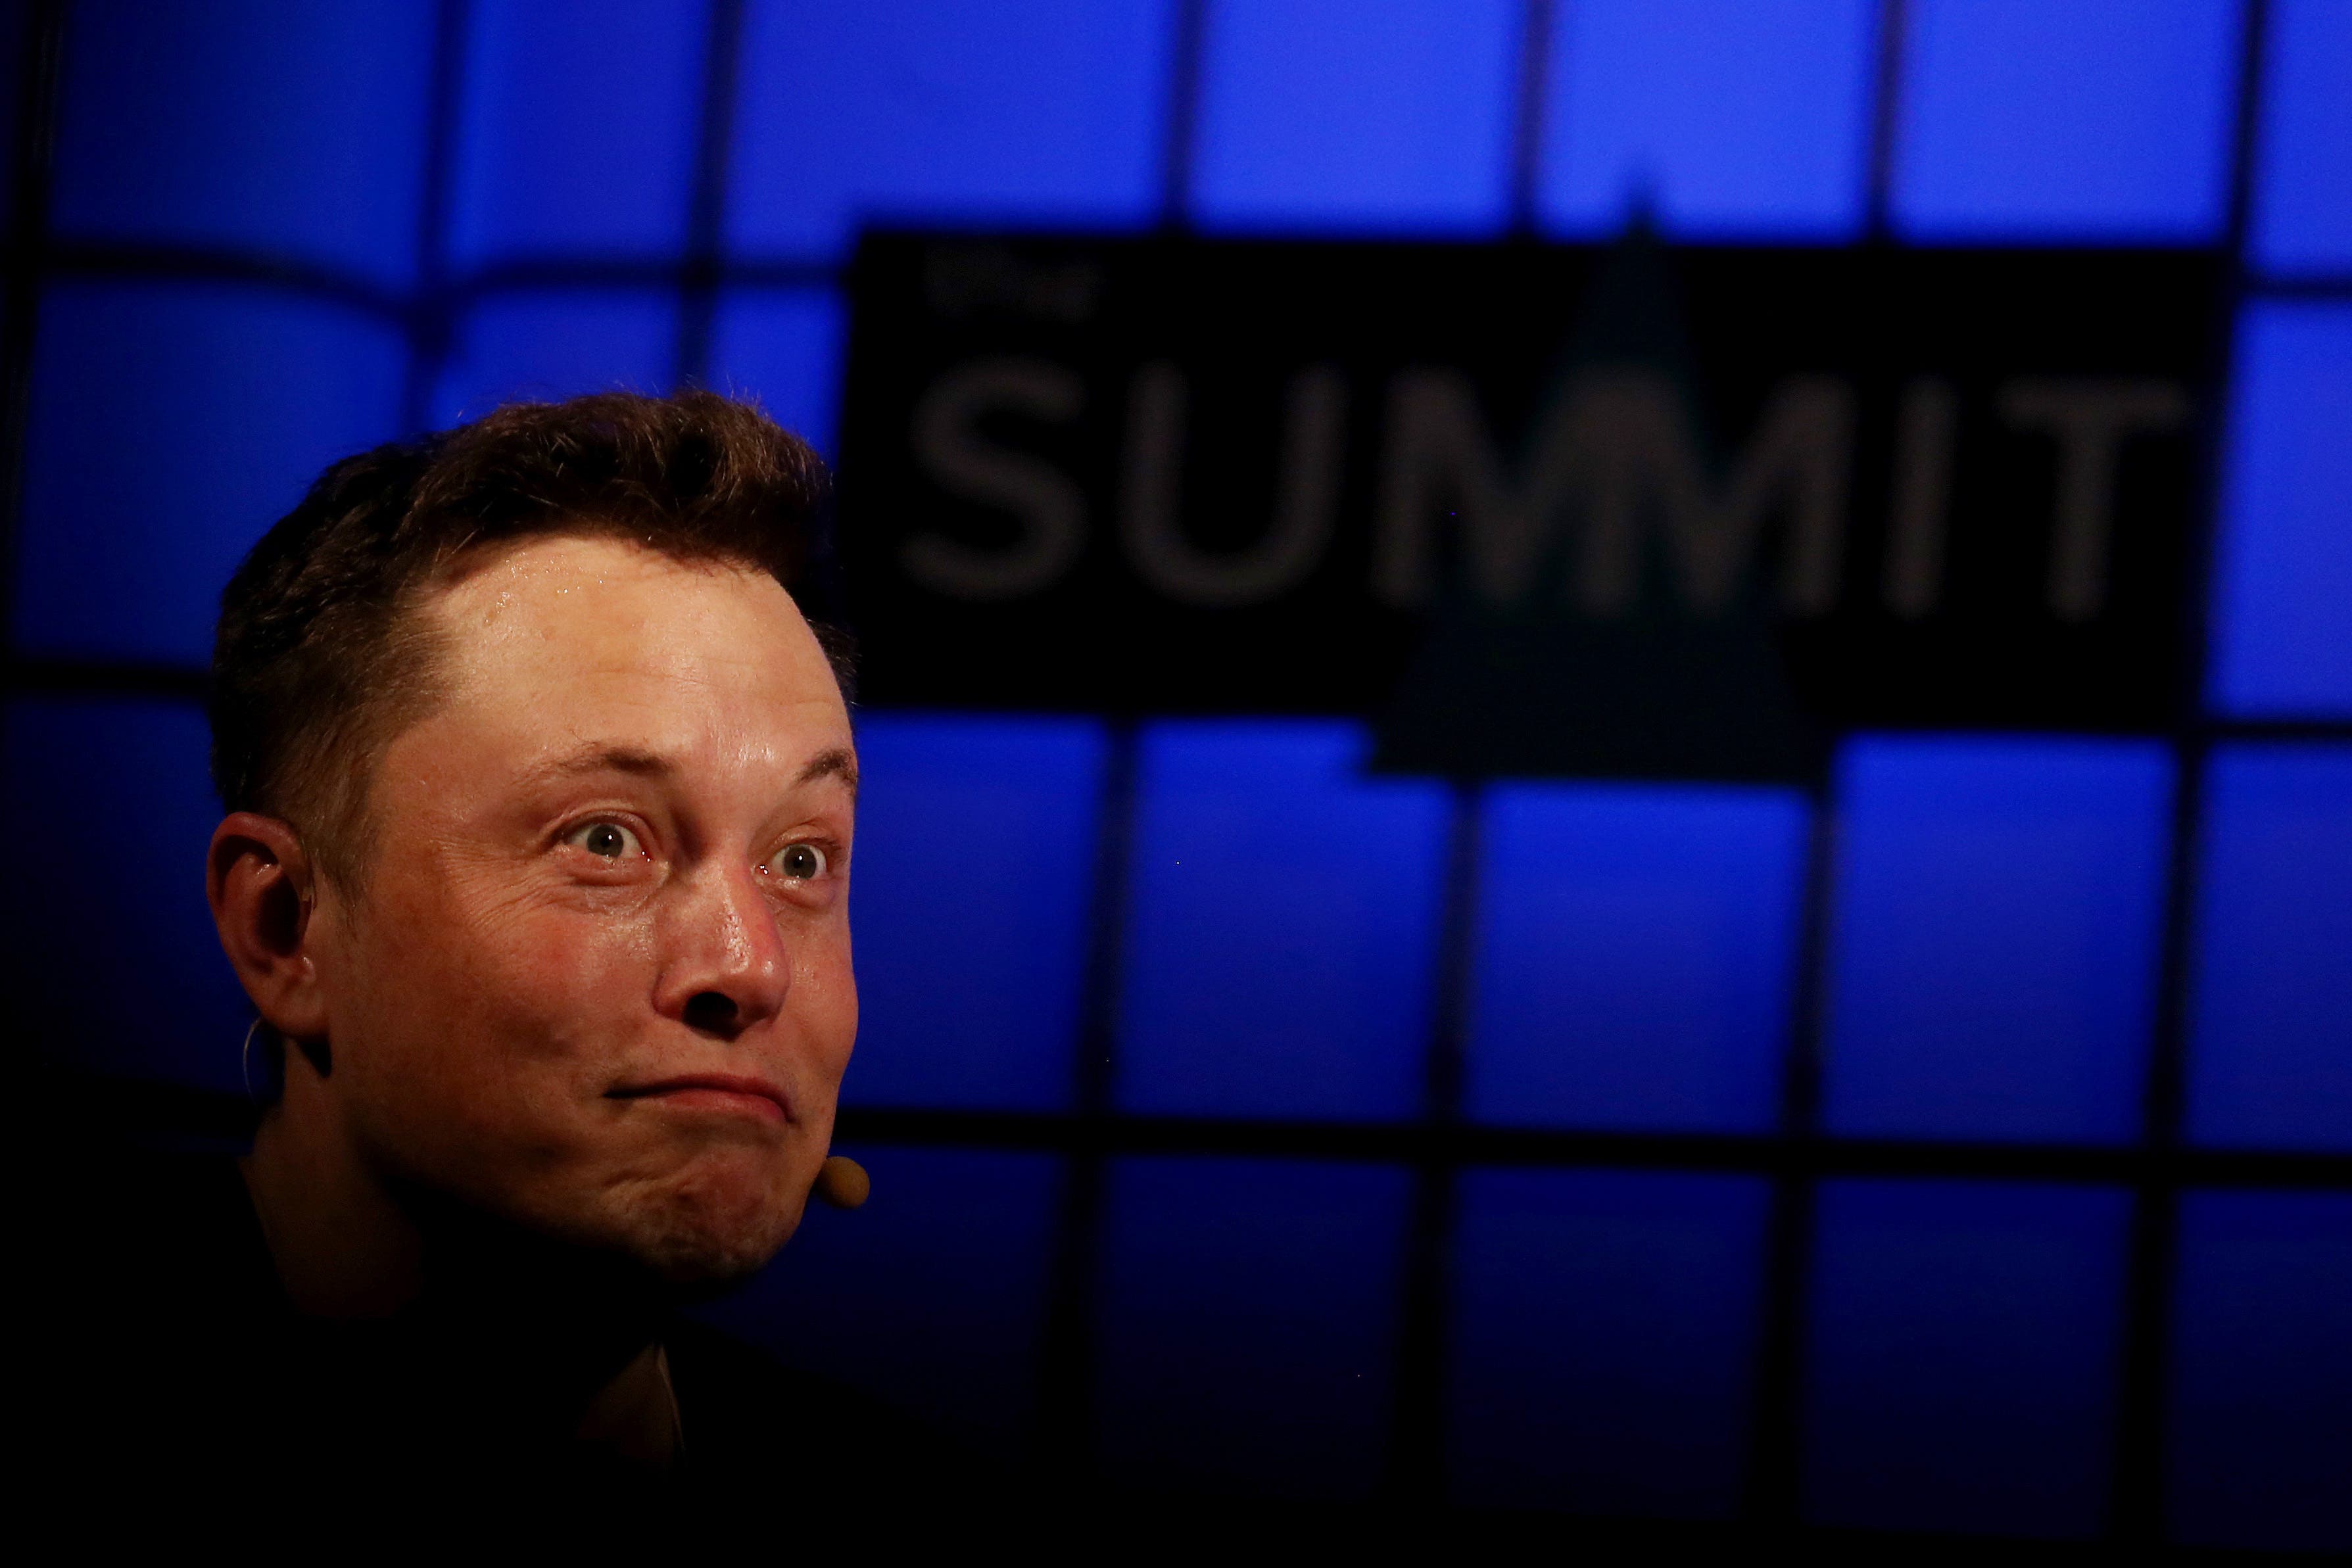 Elon Musk has completed his takeover of Twitter and is now in control of one of the most influential social media platforms (Brian Lawless/PA)